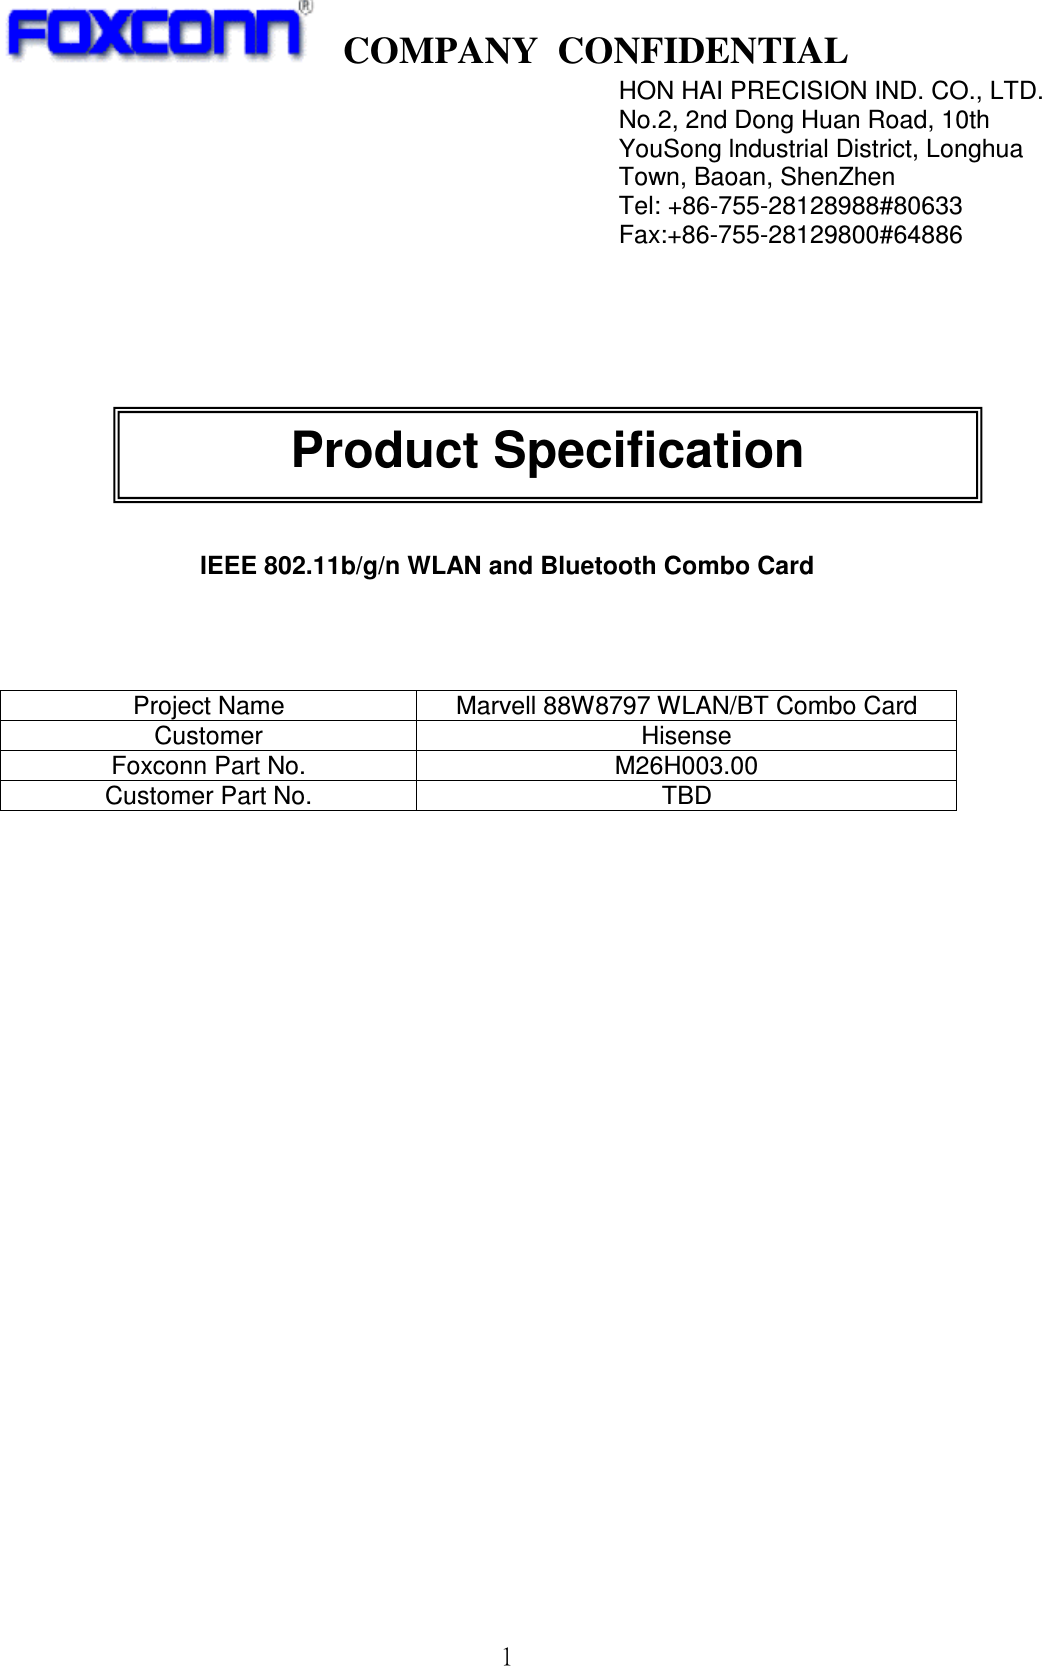    COMPANY  CONFIDENTIAL             1               IEEE 802.11b/g/n WLAN and Bluetooth Combo Card    Project Name  Marvell 88W8797 WLAN/BT Combo Card Customer  Hisense Foxconn Part No.  M26H003.00 Customer Part No.  TBD                             HON HAI PRECISION IND. CO., LTD. No.2, 2nd Dong Huan Road, 10th YouSong lndustrial District, Longhua Town, Baoan, ShenZhen Tel: +86-755-28128988#80633     Fax:+86-755-28129800#64886 Product Specification  